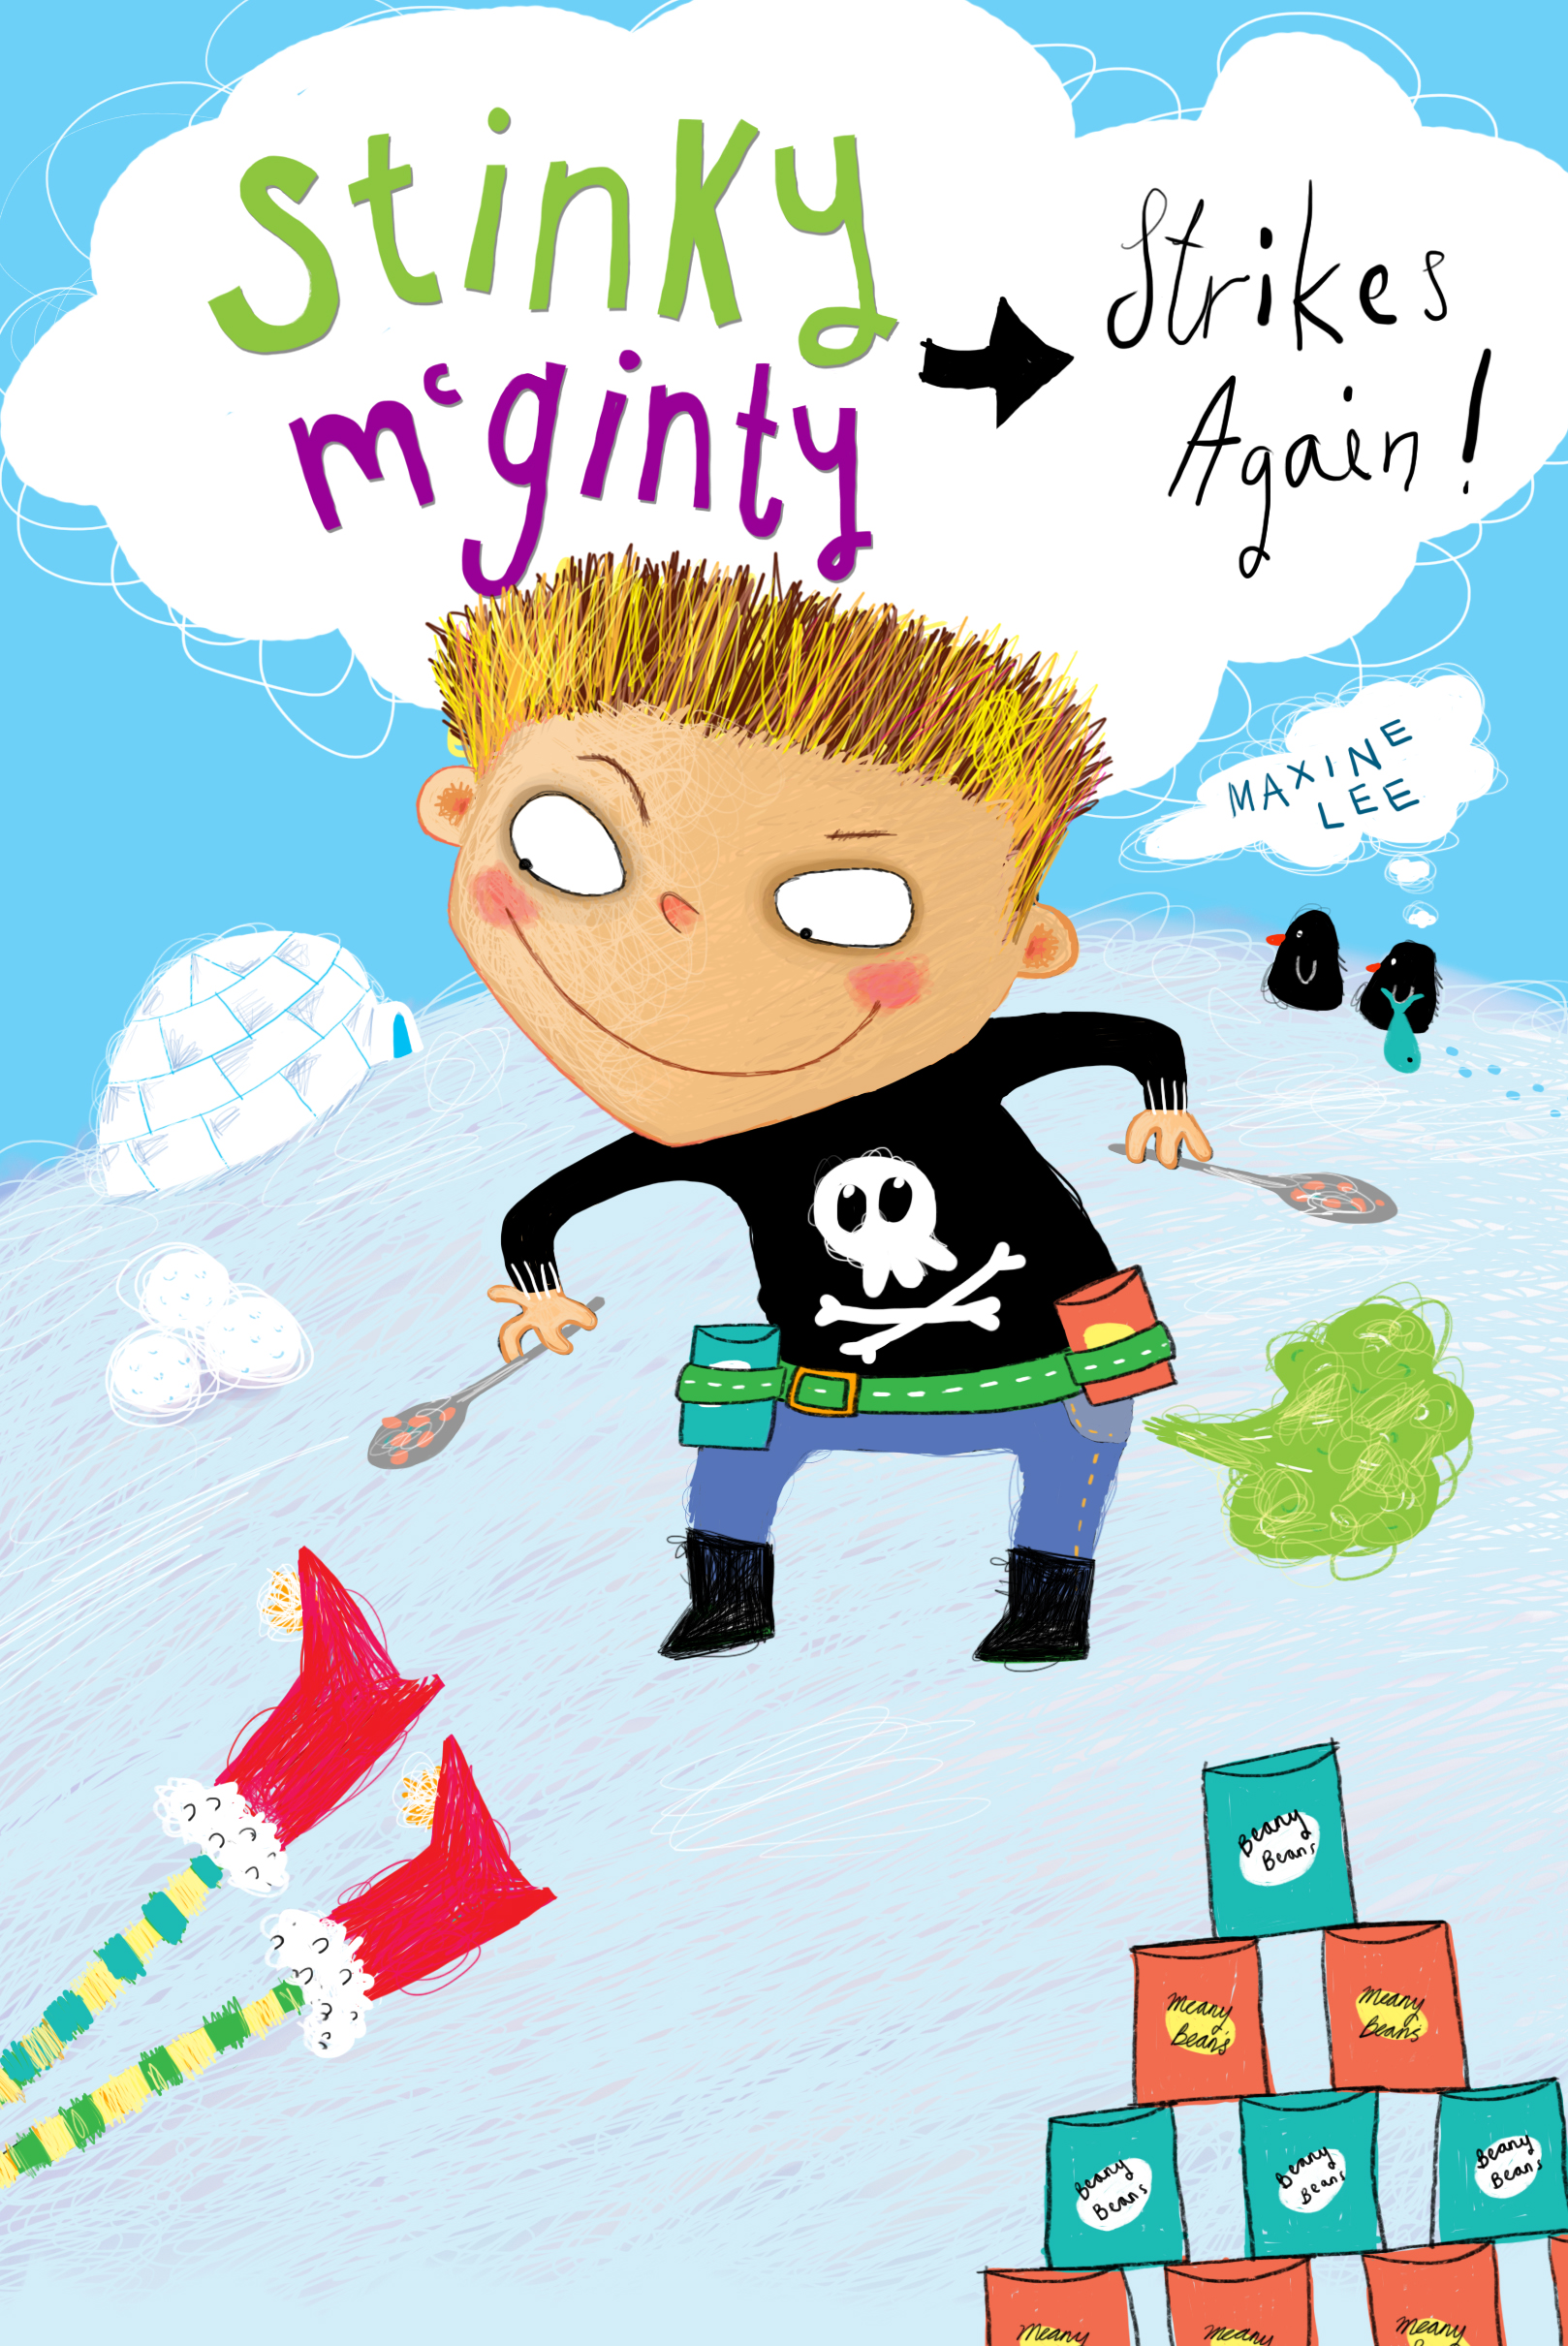 Book Cover Concept - Stinky McGinty